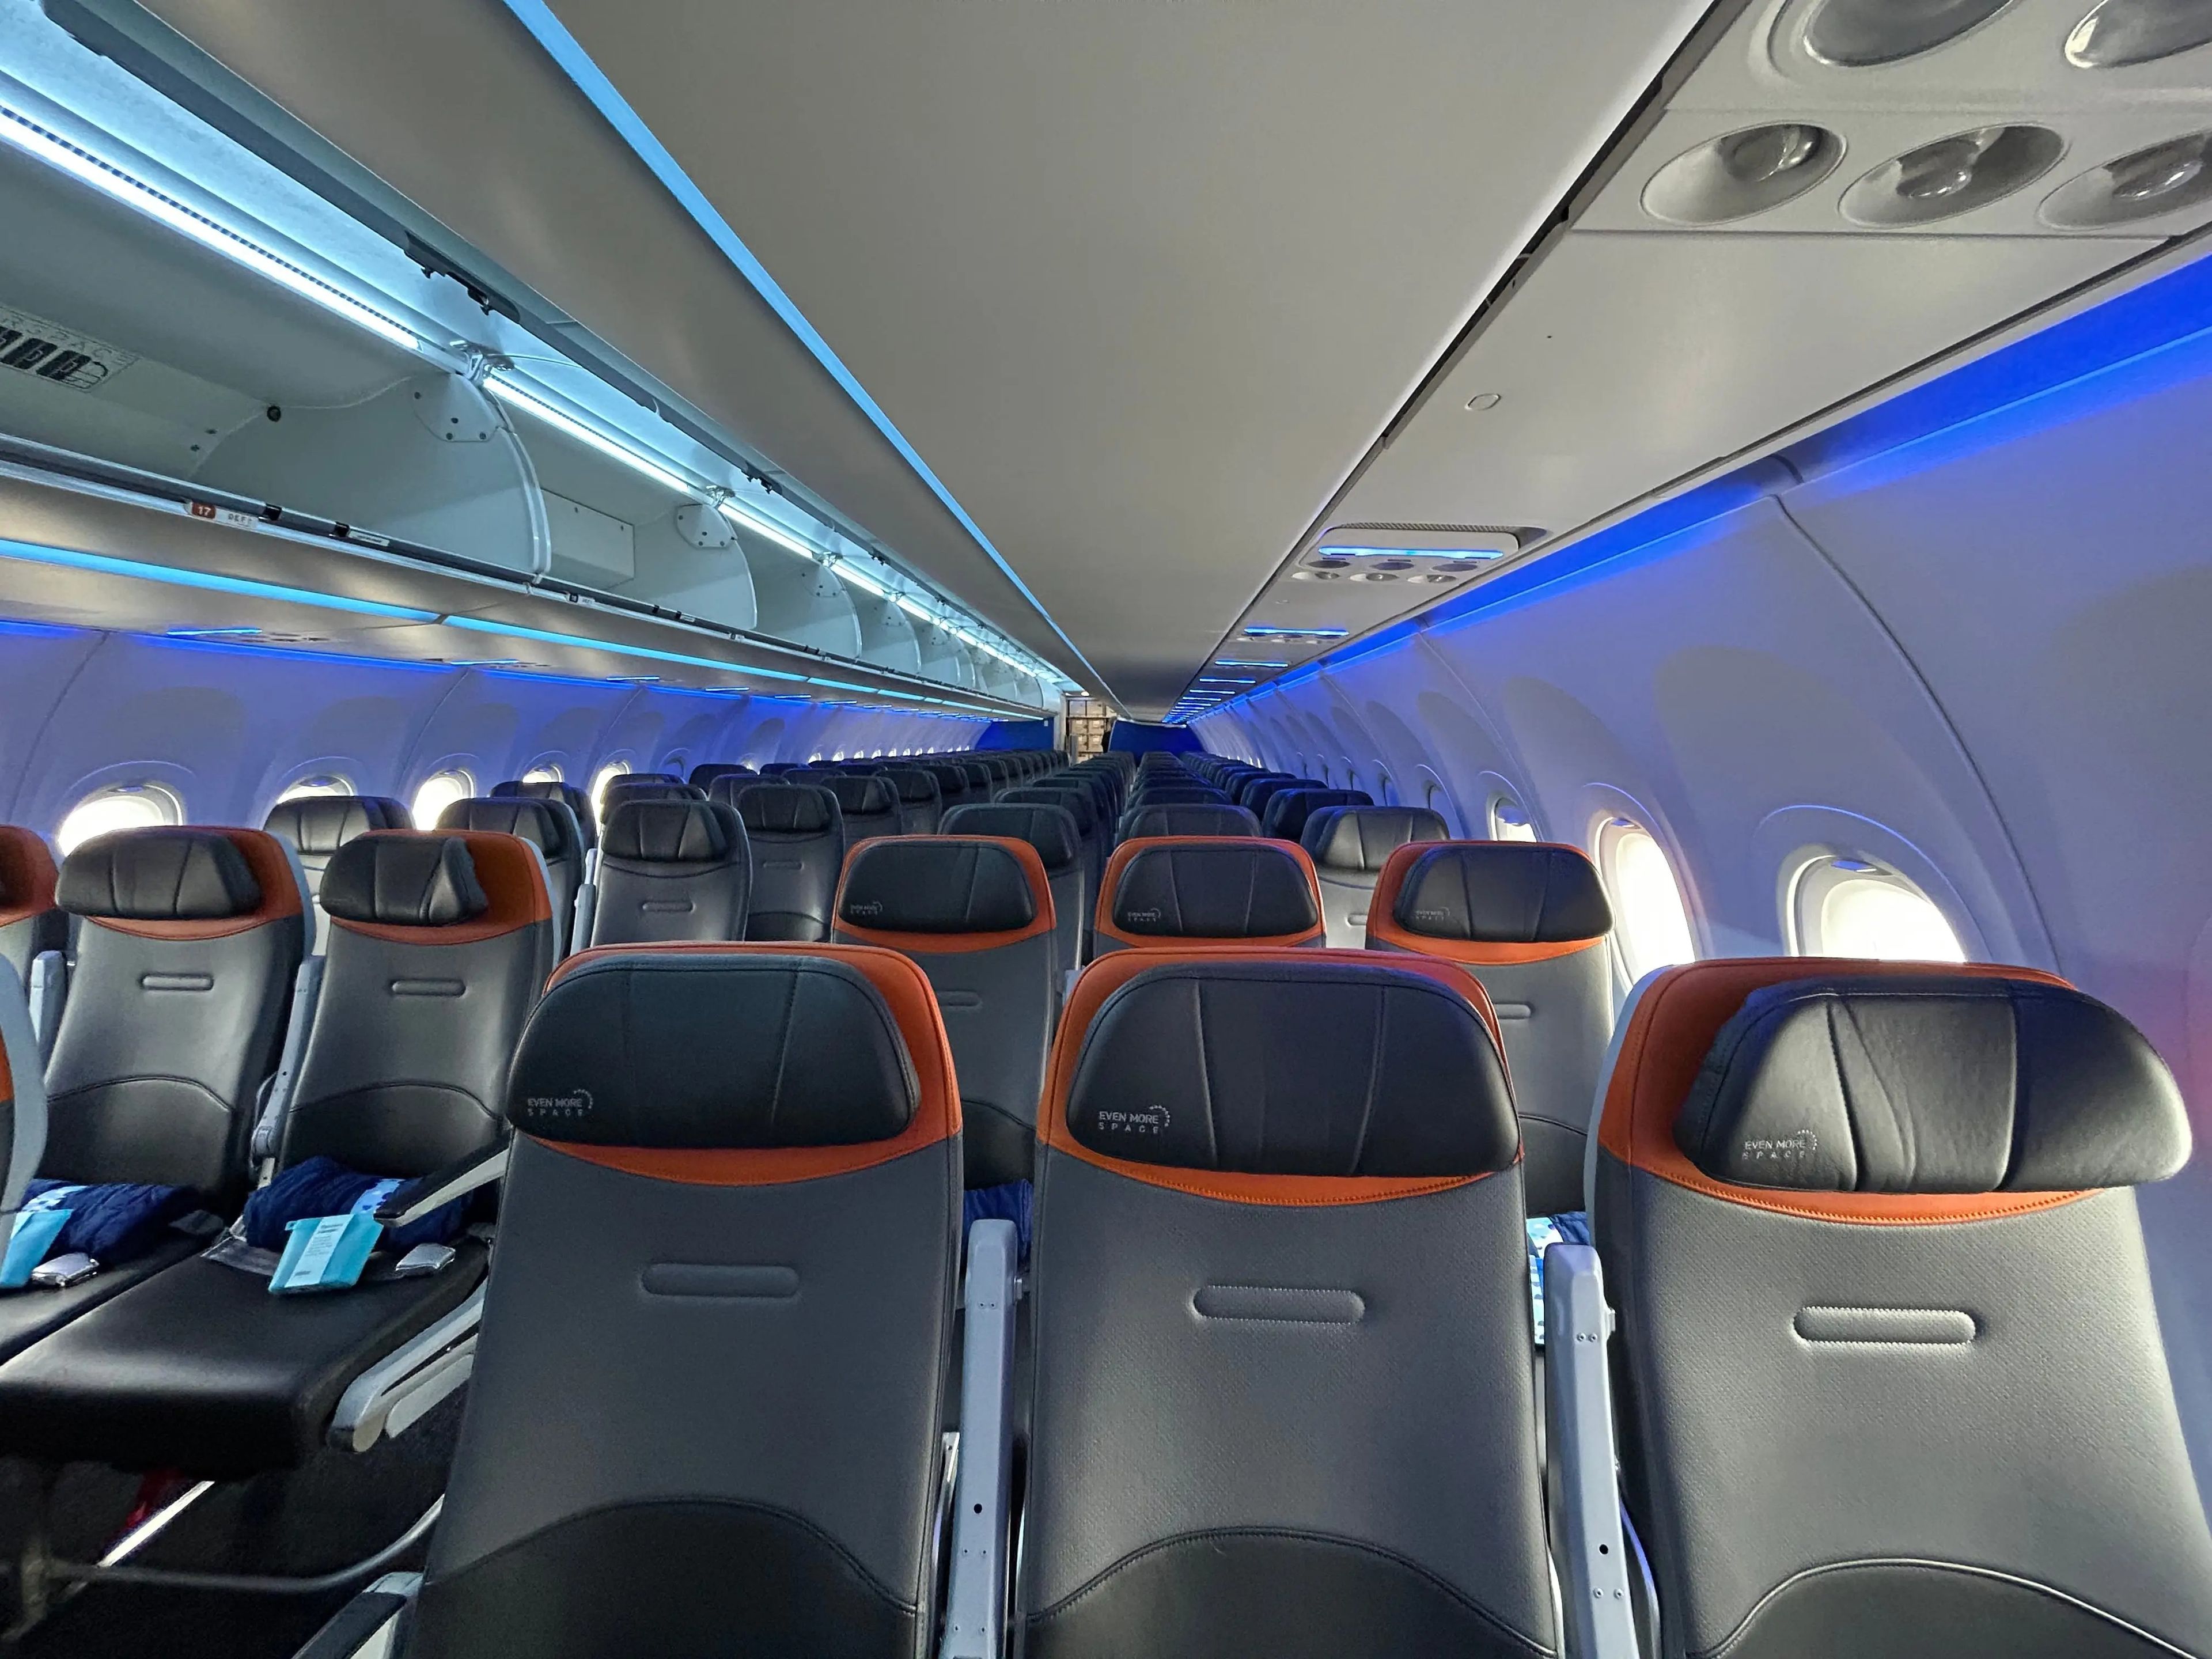 Even More Space seats on JetBlue.